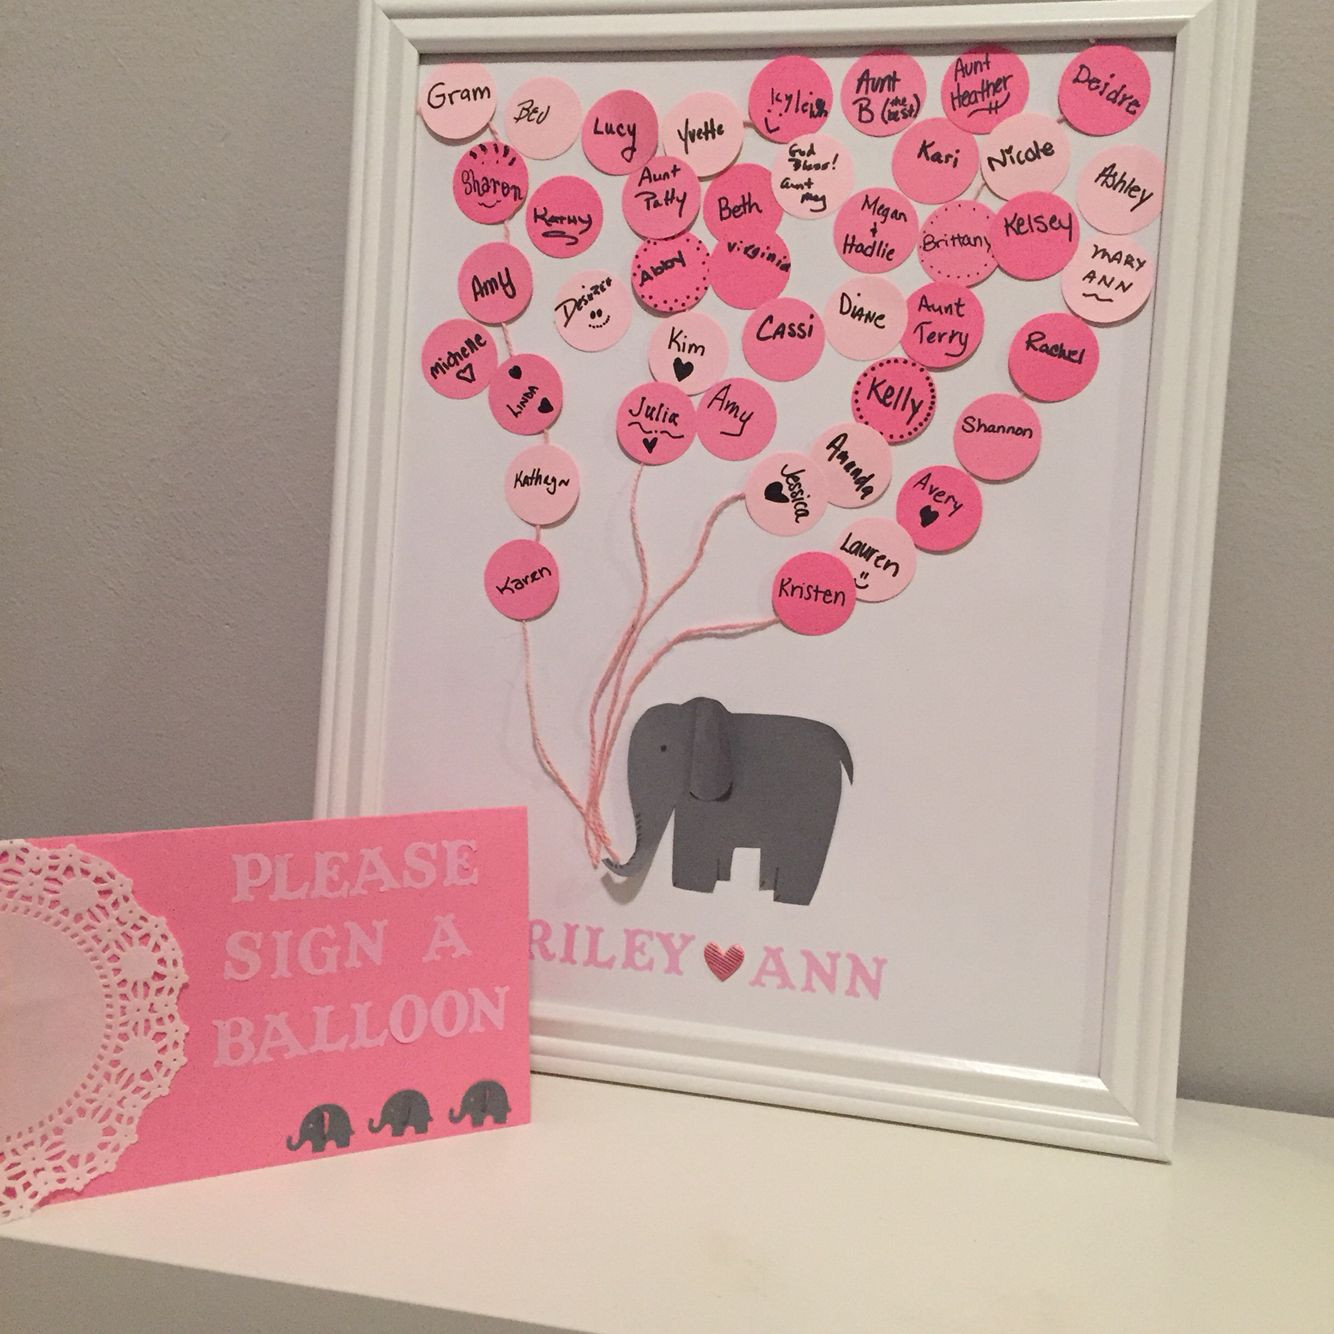 Elephant Baby Shower Decorations DIY
 Diy baby shower guest book Elephant themed for our baby